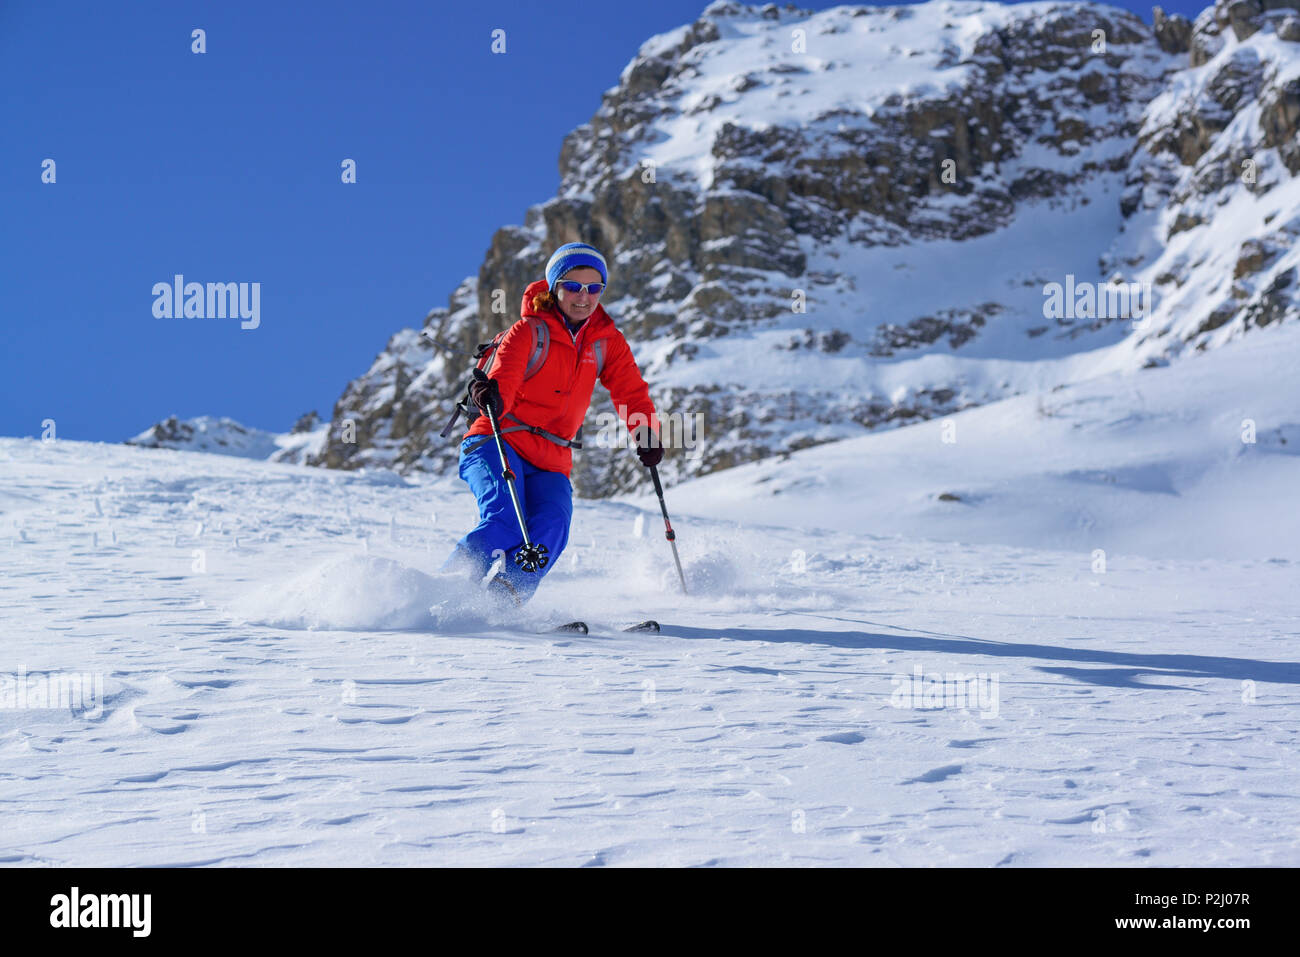 Woman back-country skiing downhill through powdersnow from Passo Croce, Passo Croce, Valle Maira, Cottian Alps, Piedmont, Italy Stock Photo